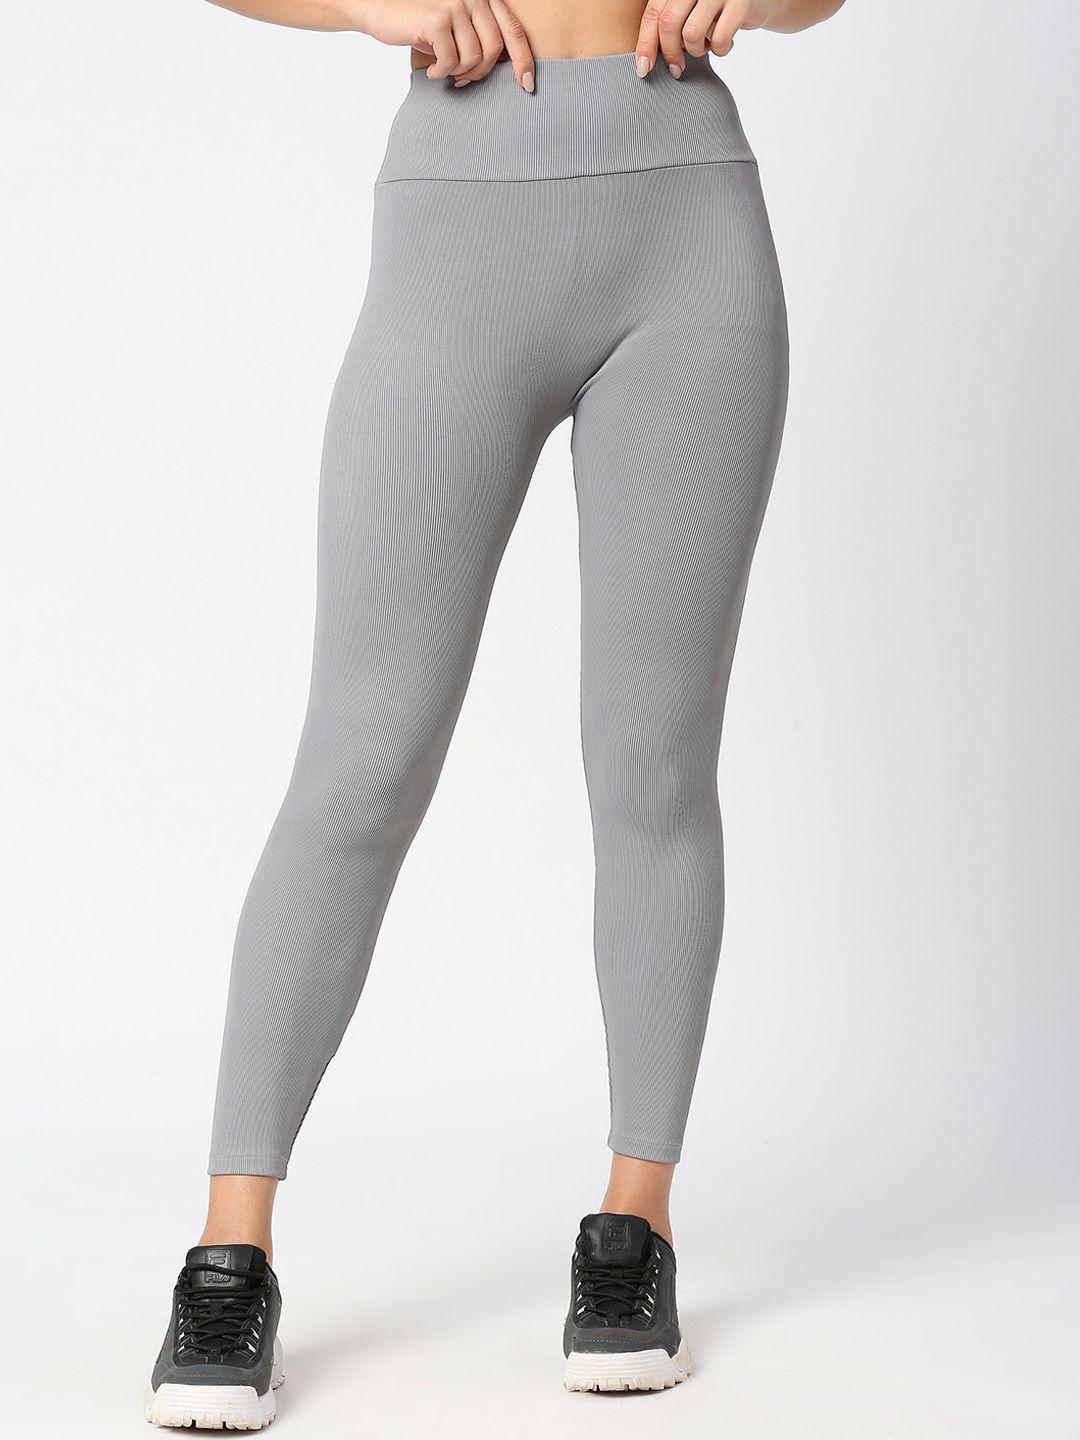 laasa-sports-high-rise-dry-fit-tights